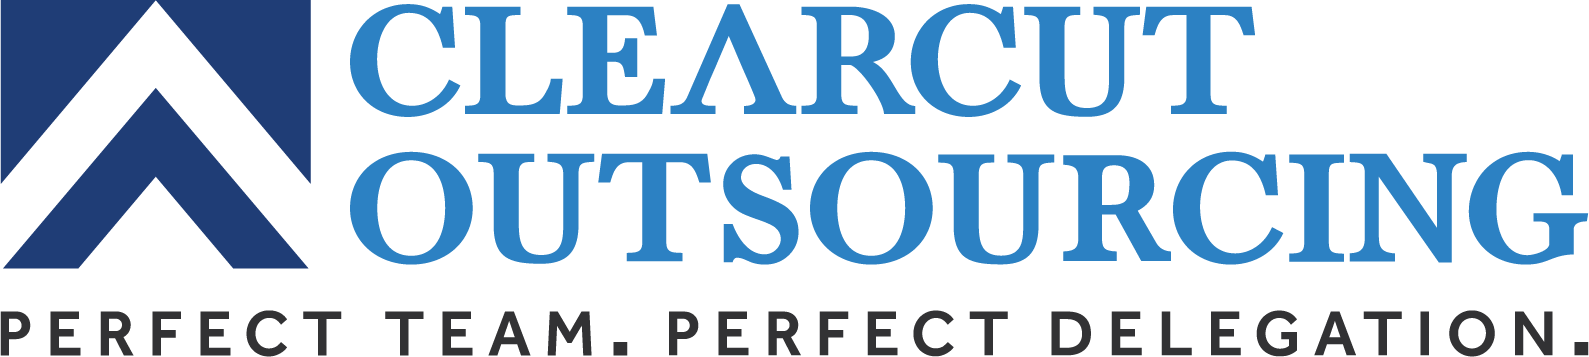 Clearcut Outsourcing Logo